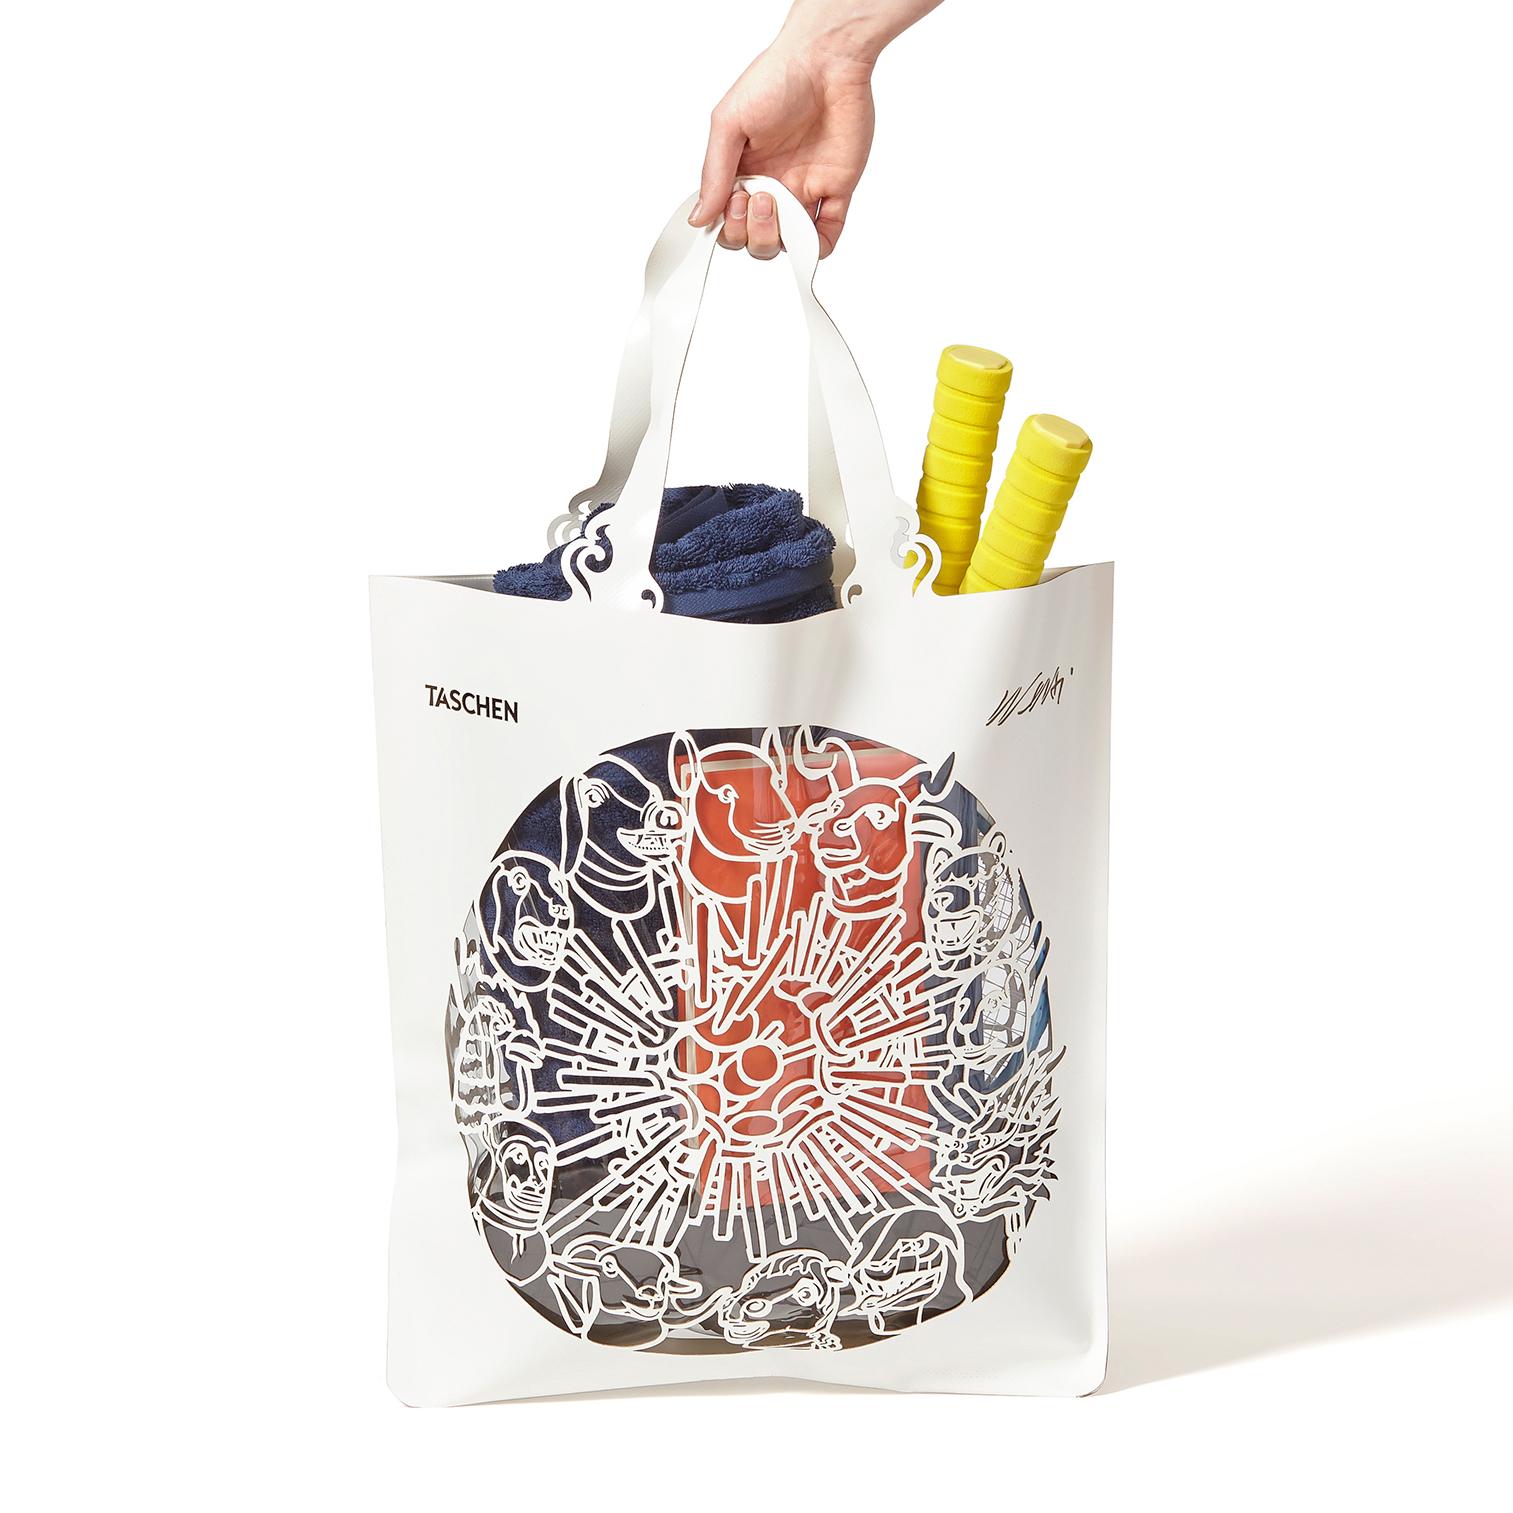 White PVC bag with transparent inlay
Measures: 18.5 x 25.4 inches (without handles)
Edition of 2,500
Custom gift box

This limited edition tote by Ai Weiwei is both the ultimate beach-to-dinner tote and beautiful enough to frame and hang on